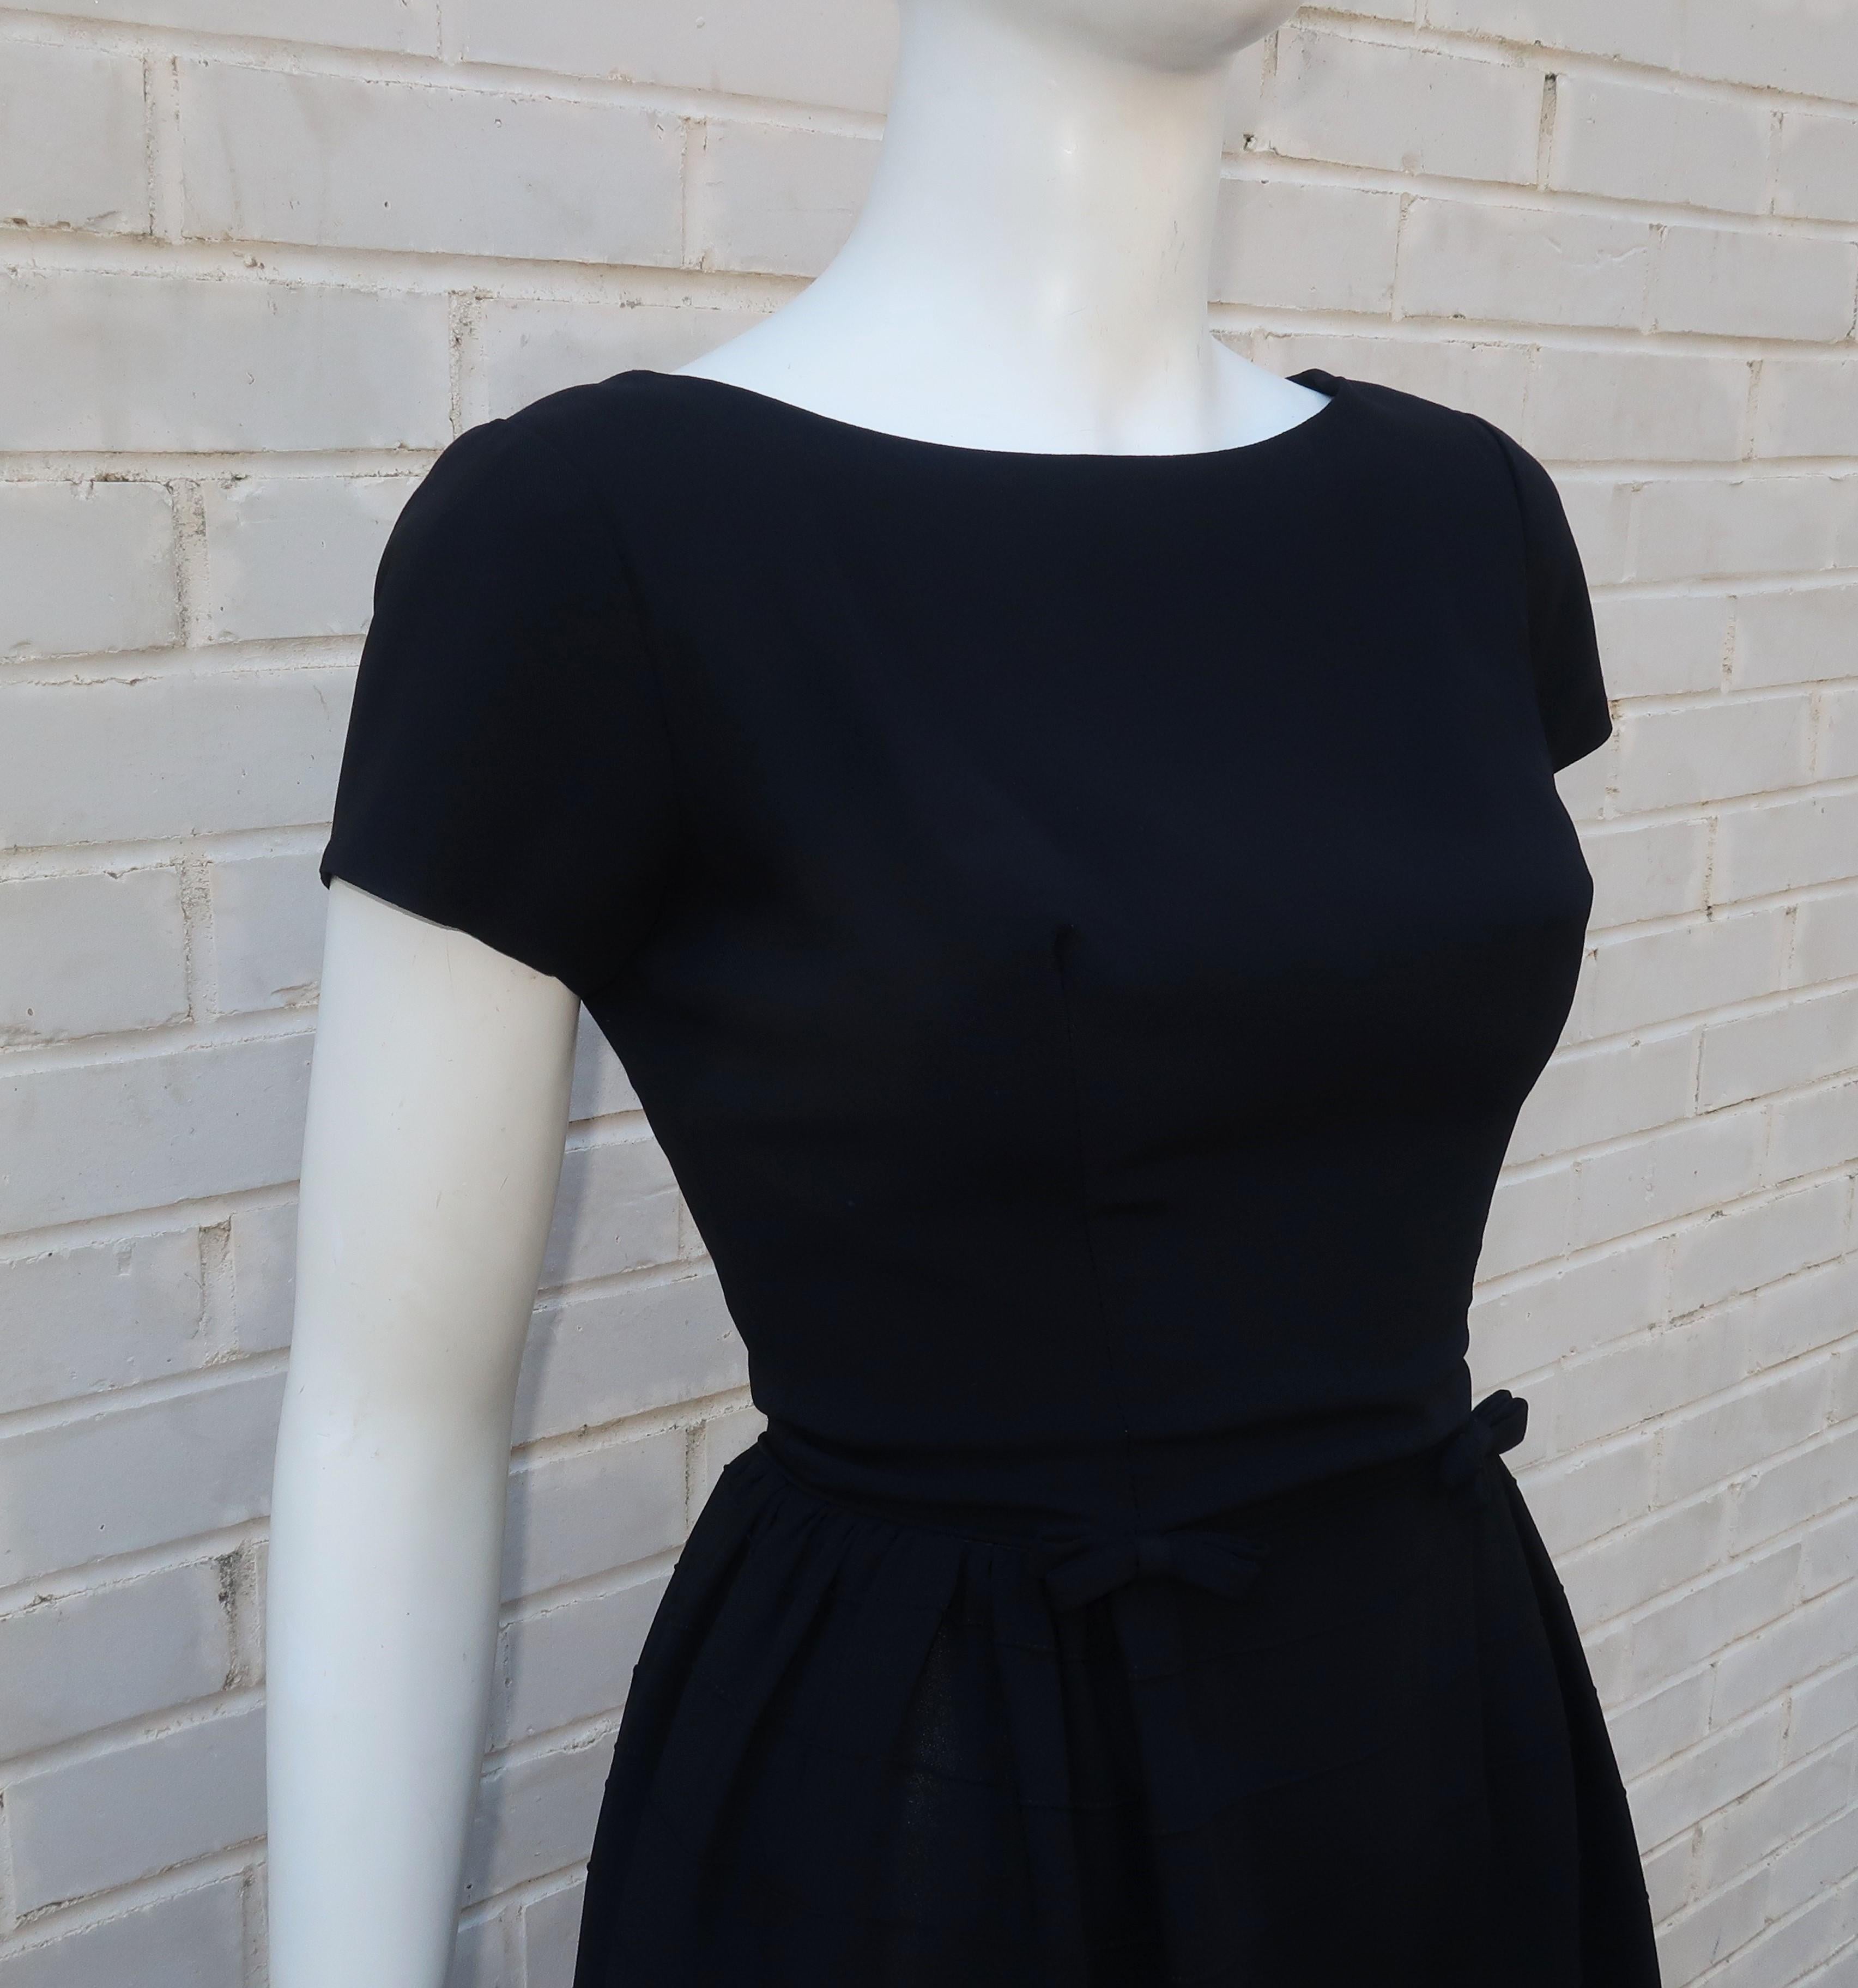 Channel a 1950's Audrey Hepburn look ... girlish and sophisticated ... with this classic 1950's 'little black dress' for the Best & Co. New York label.  For decades, B & C offered great American designs to its customers often from young in-house